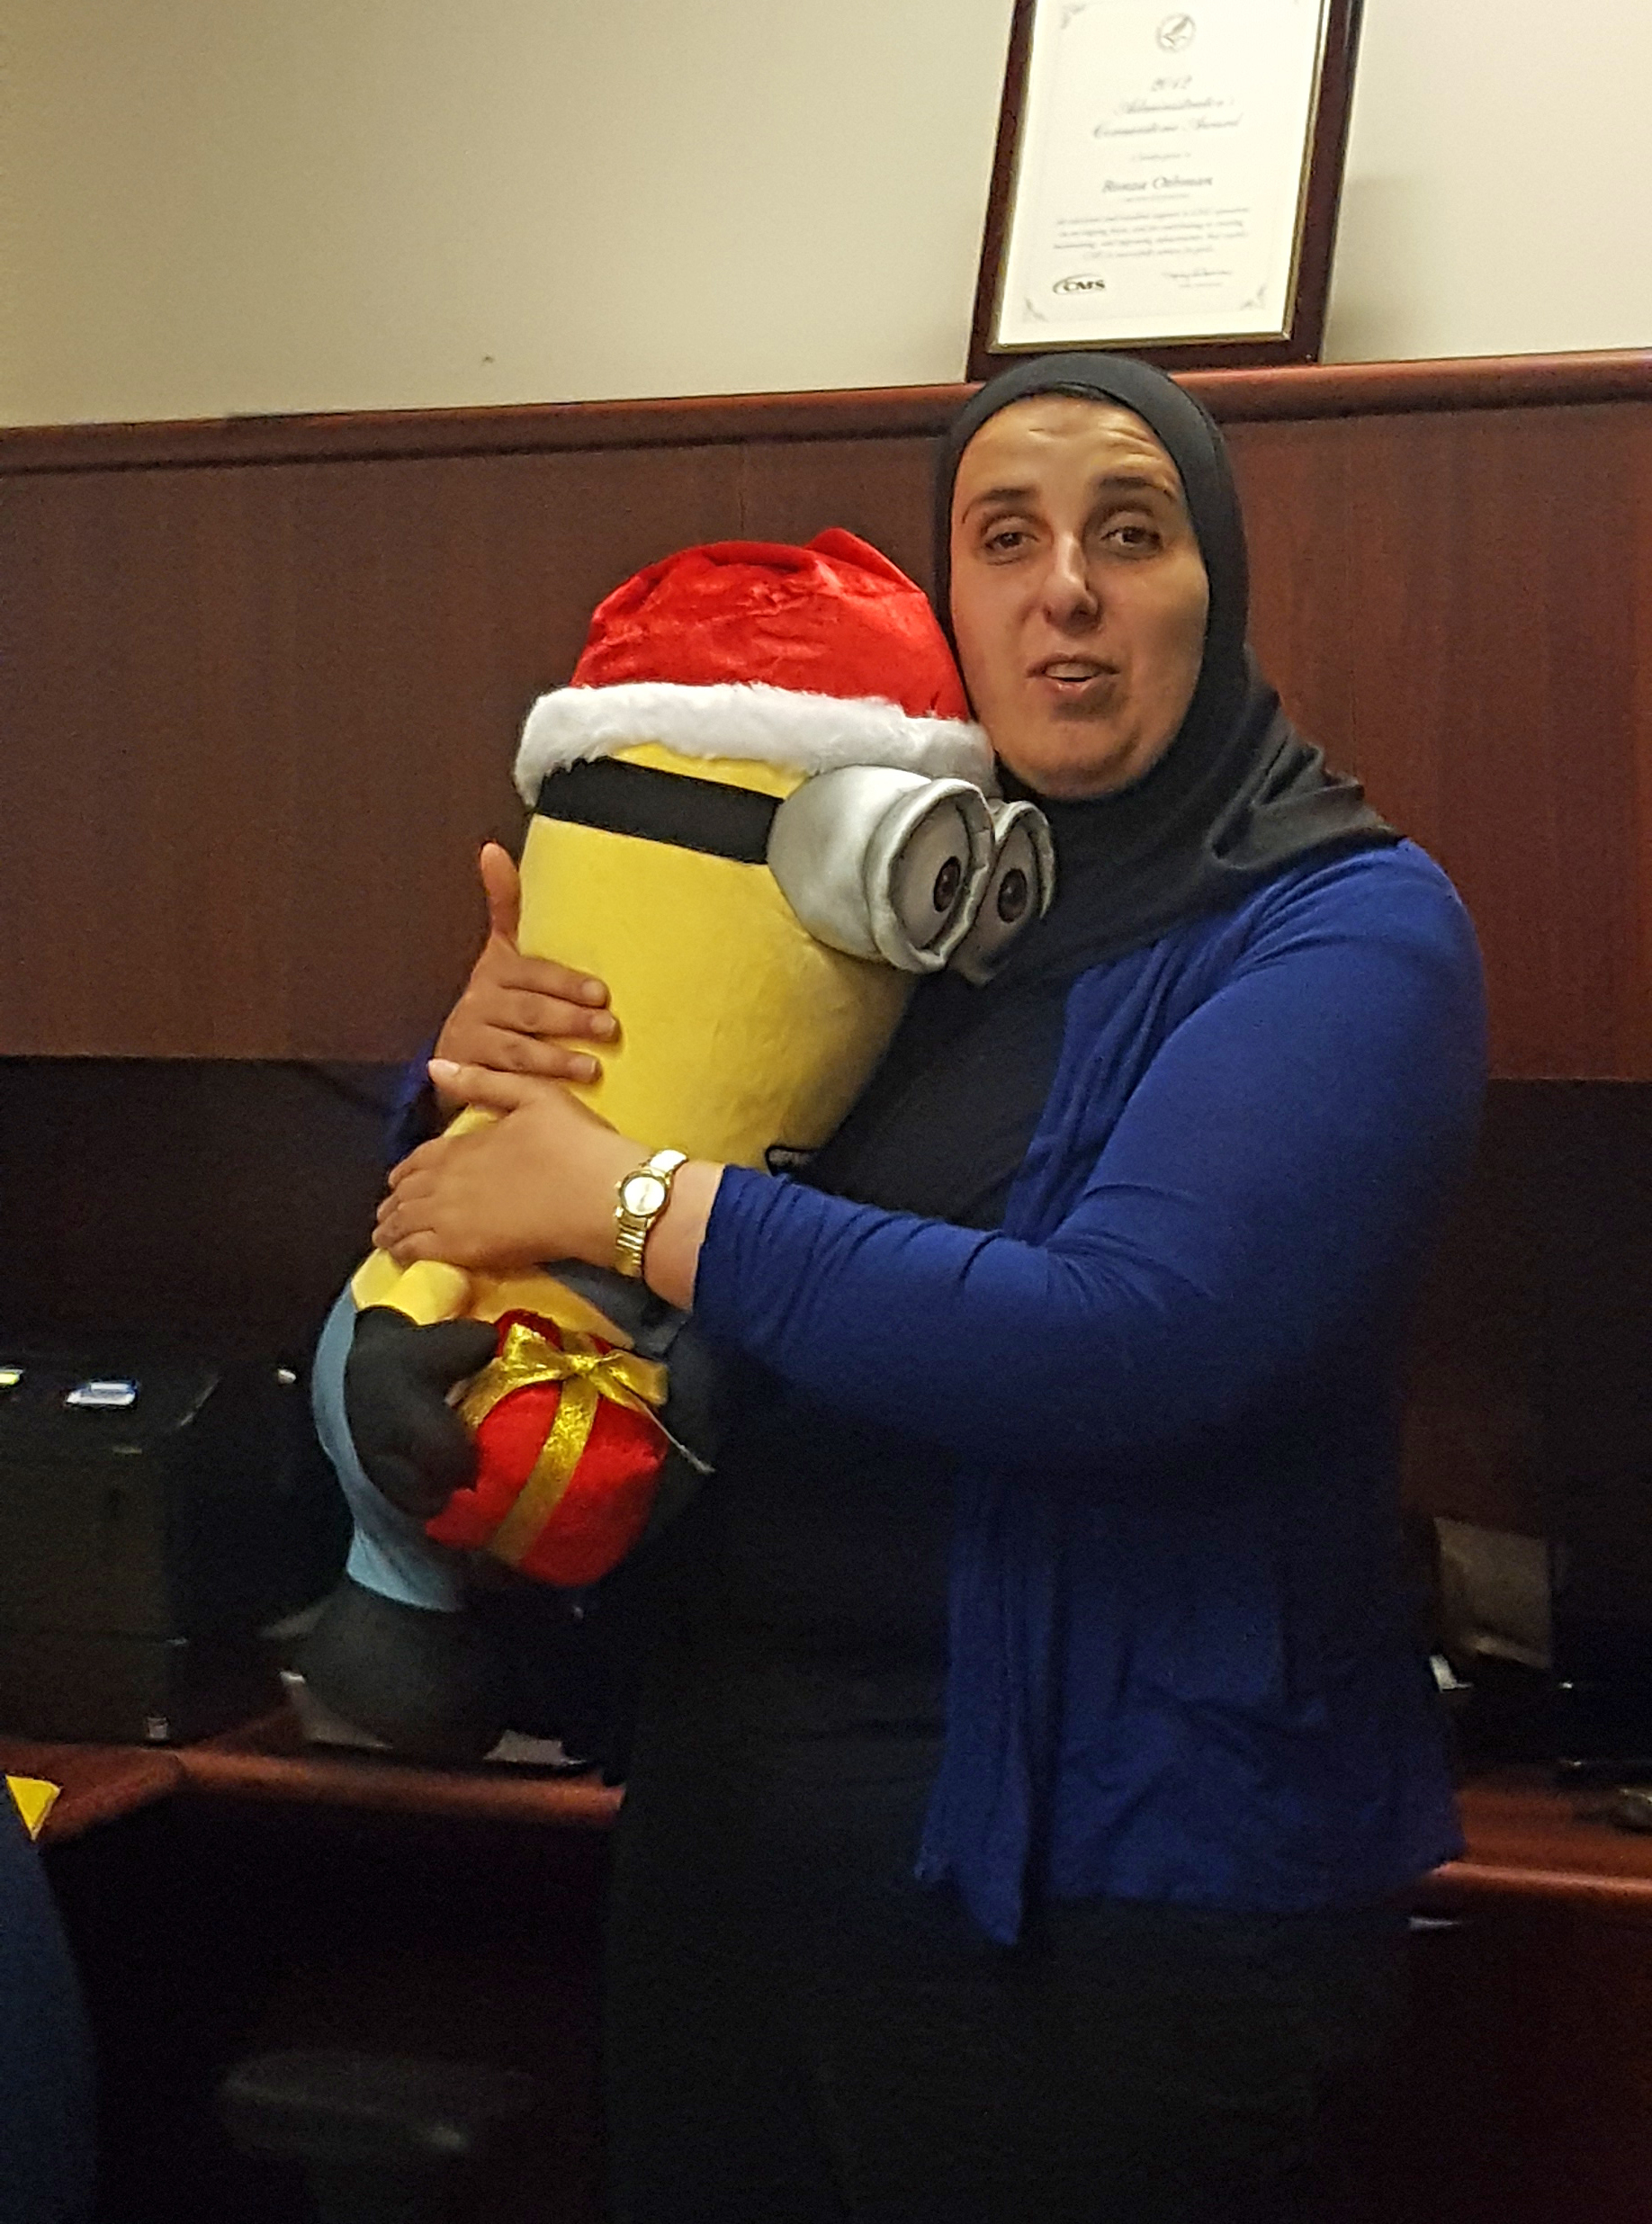 Ronza Othman holds a stuffed minion, a character from the movie Despicable Me.